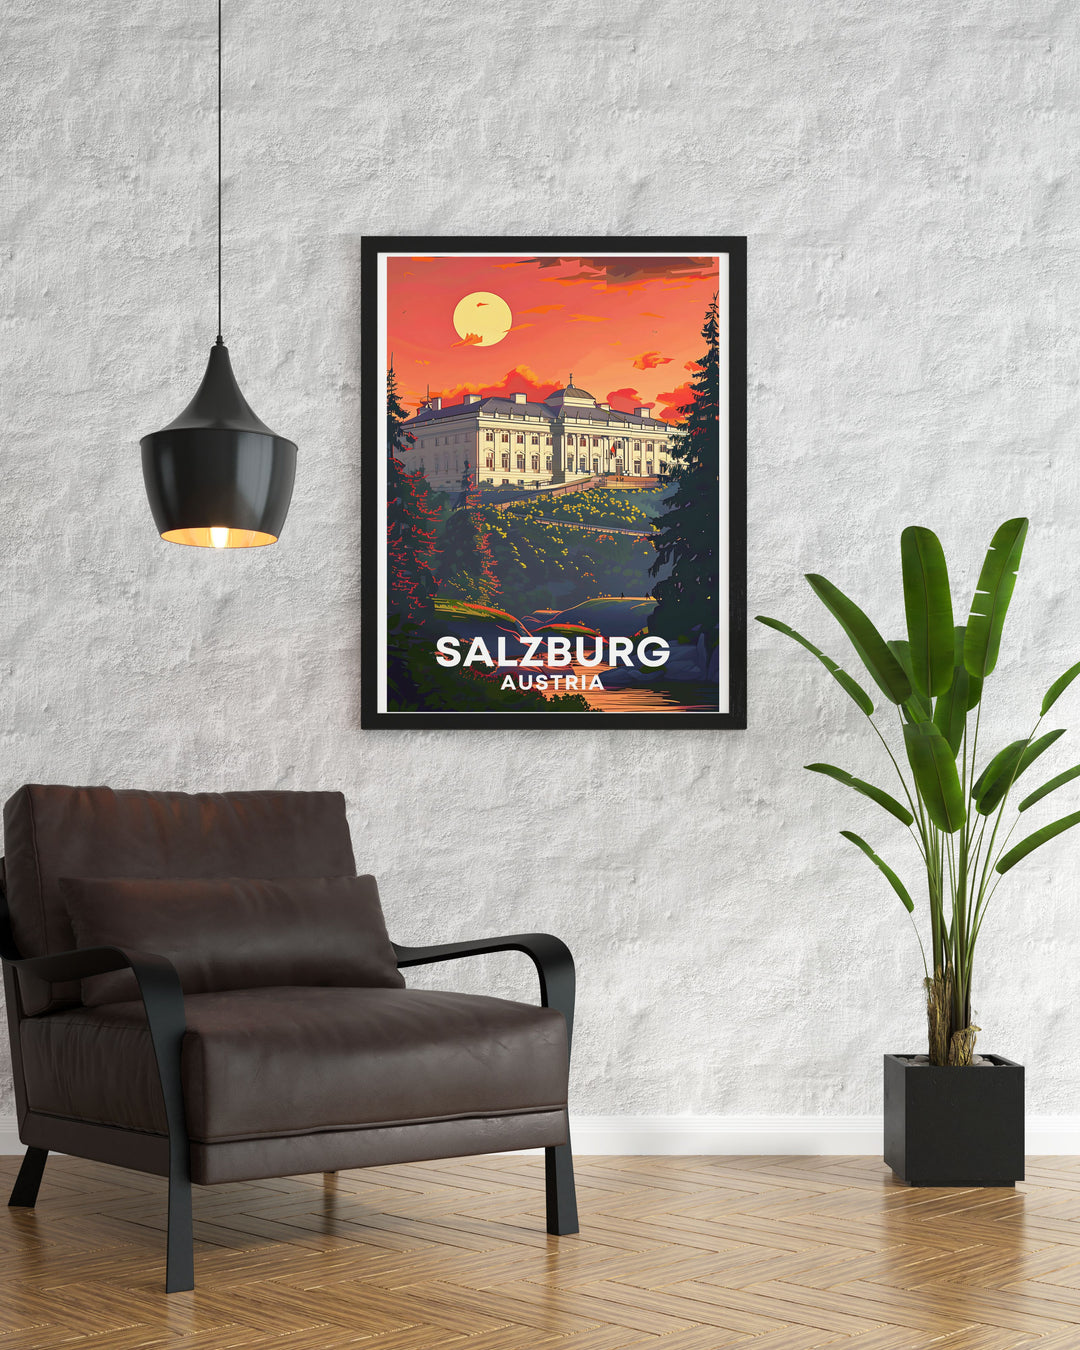 Mirabel Palace and Zauchensee skiing are beautifully captured in this vintage travel print. Perfect for home decor, it celebrates Austrian heritage and skiing culture. A unique addition to any travel poster collection and a great gift for ski lovers.